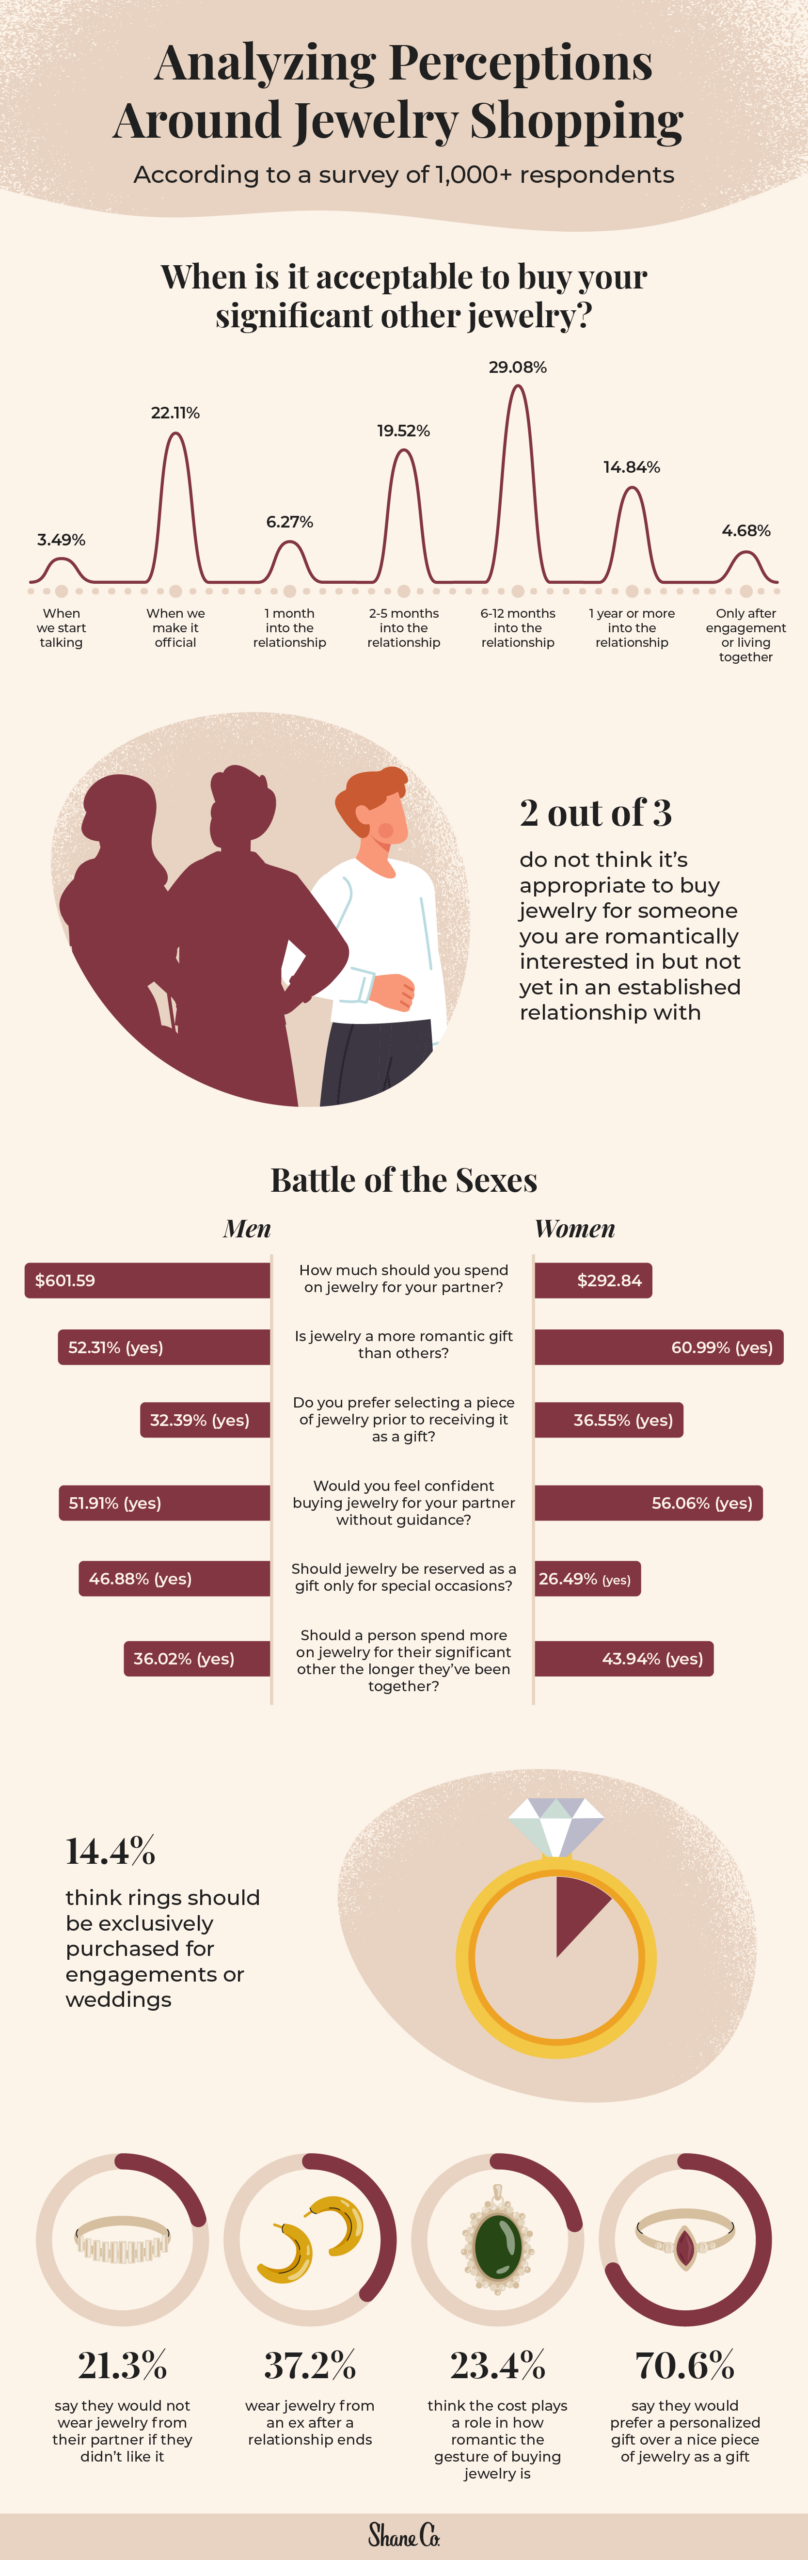 infographic showing survey insights around buying a partner jewelry